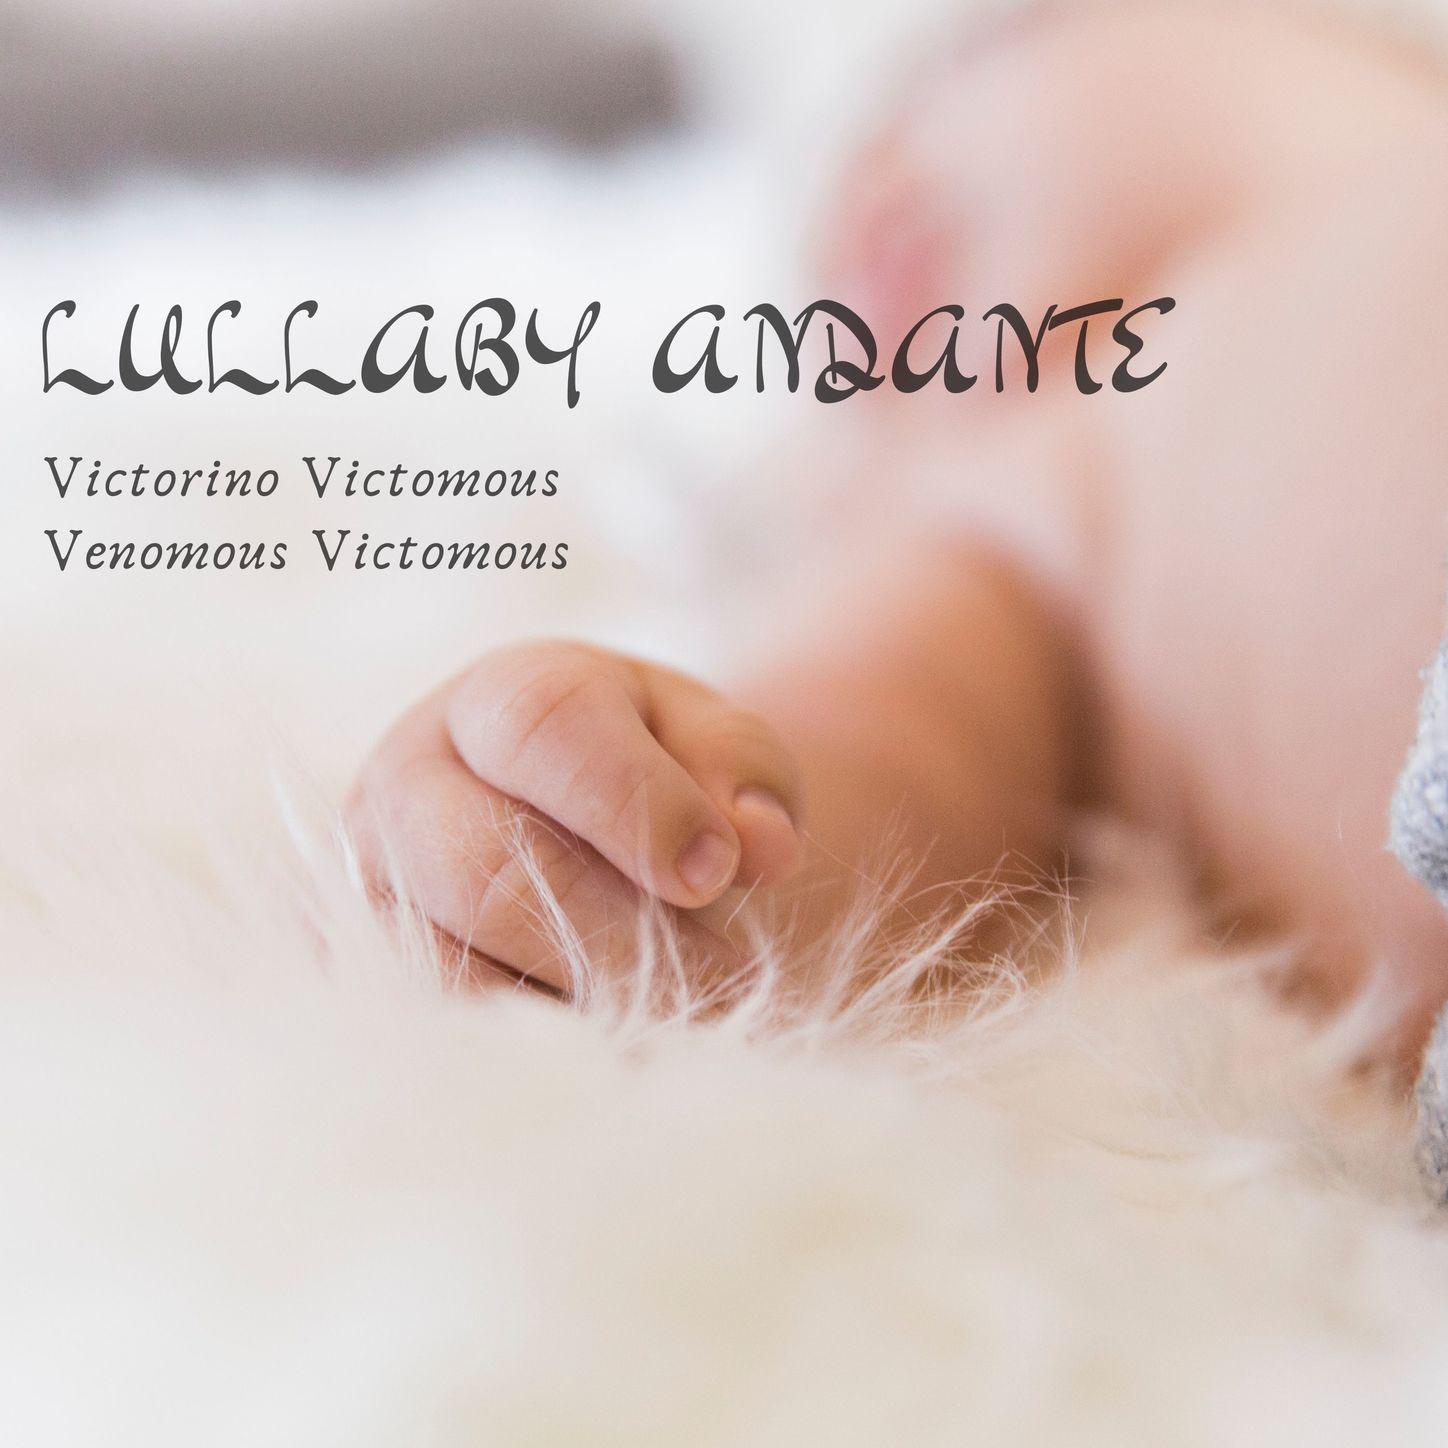 Lullaby Andante